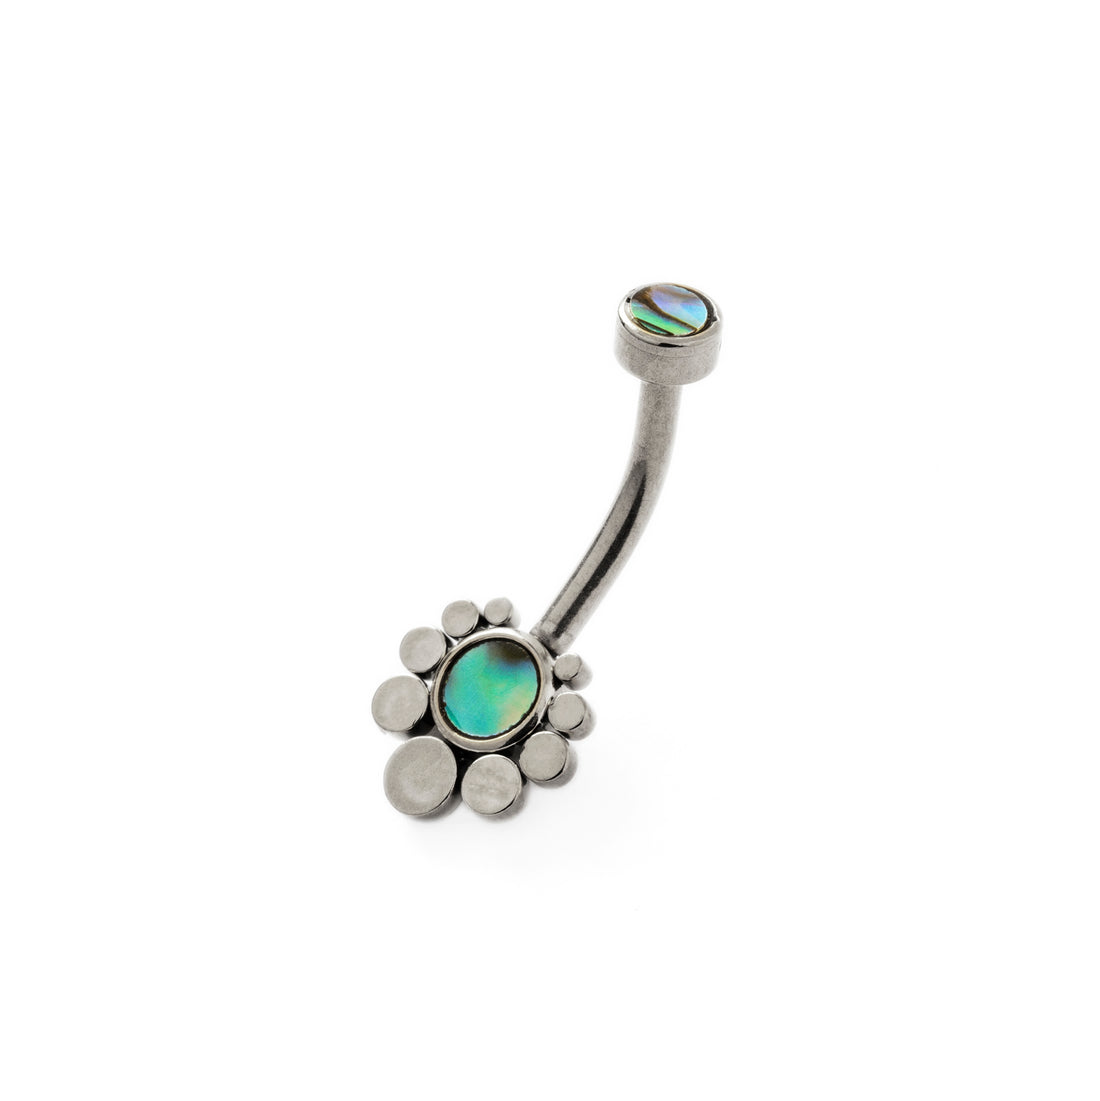 Orbit Belly Piercing with Abalone right side view